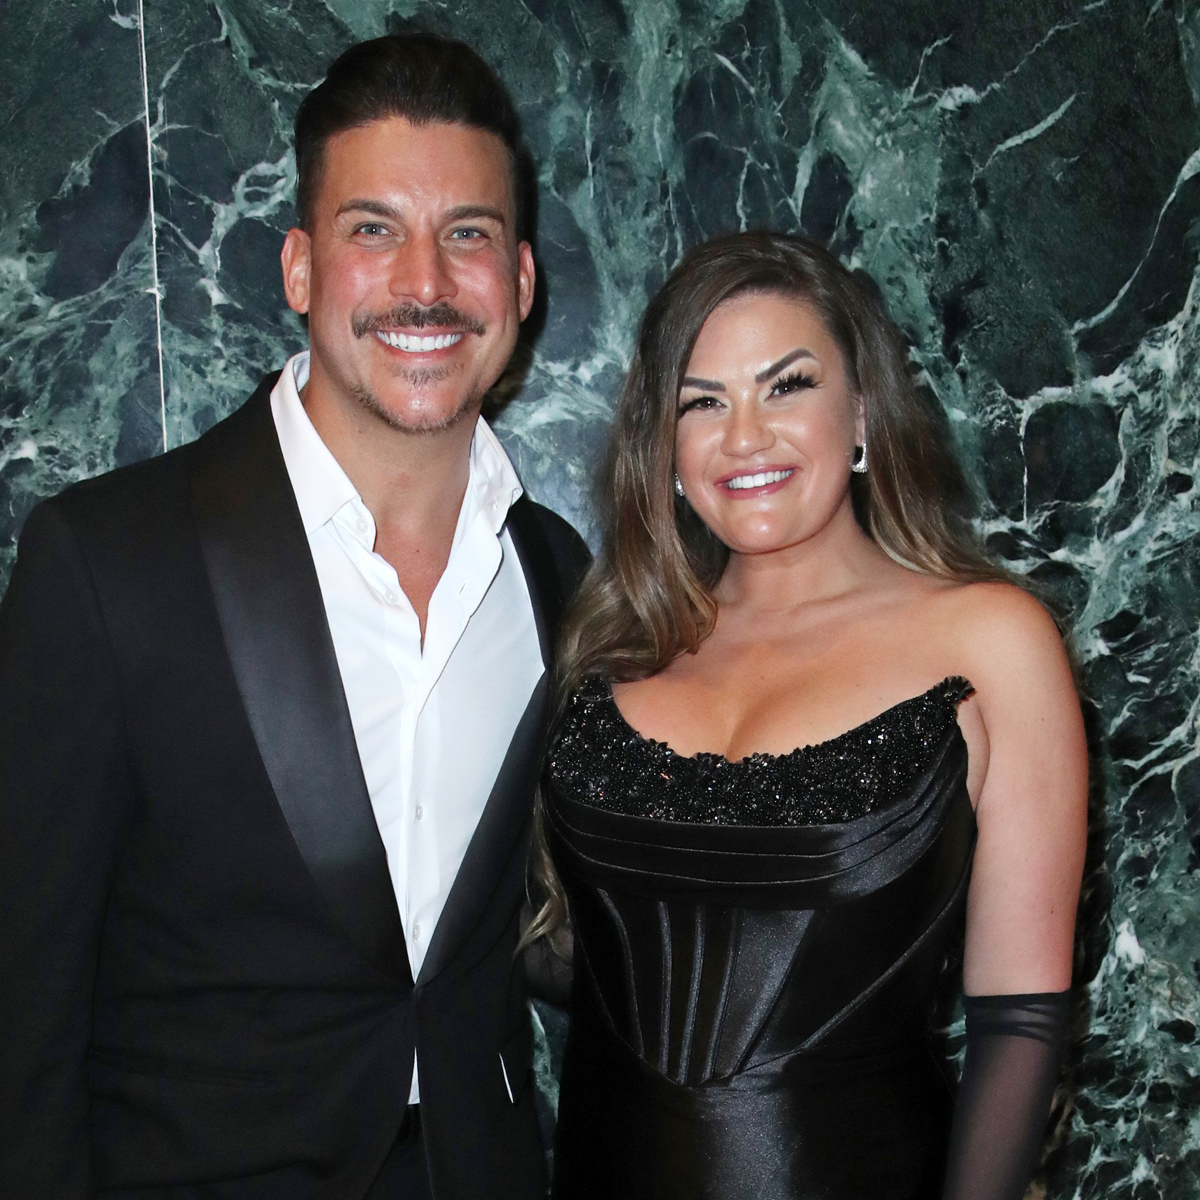 Jax Taylor and Brittany Cartwright Reveal Very Different Takes on Their Relationship Status